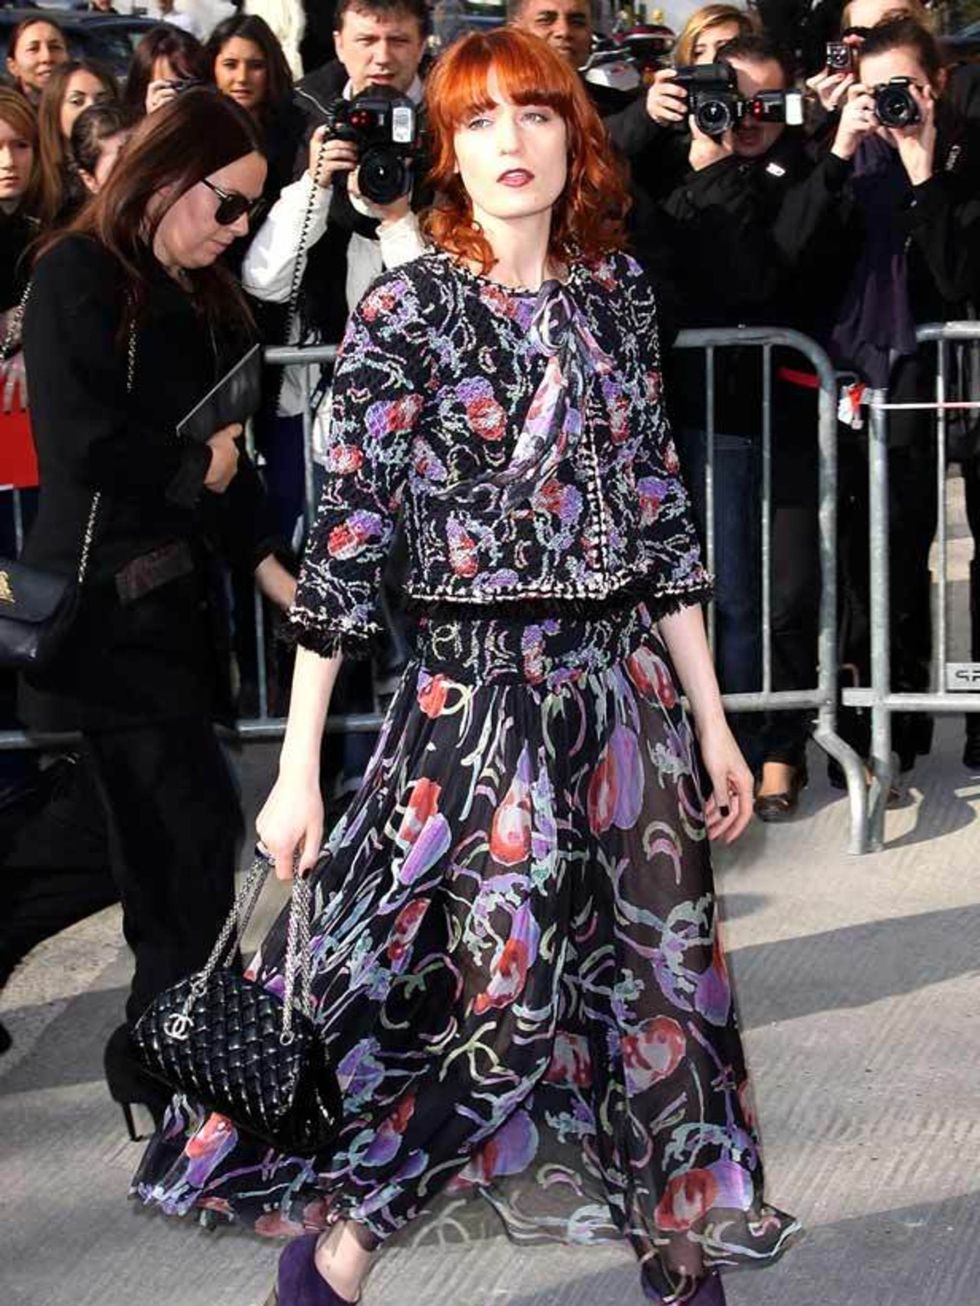 <p><a href="http://www.elleuk.com/starstyle/style-files/%28section%29/florence-welch">Florence Welch</a> arriving at the Chanel show,  8 March 2011</p>